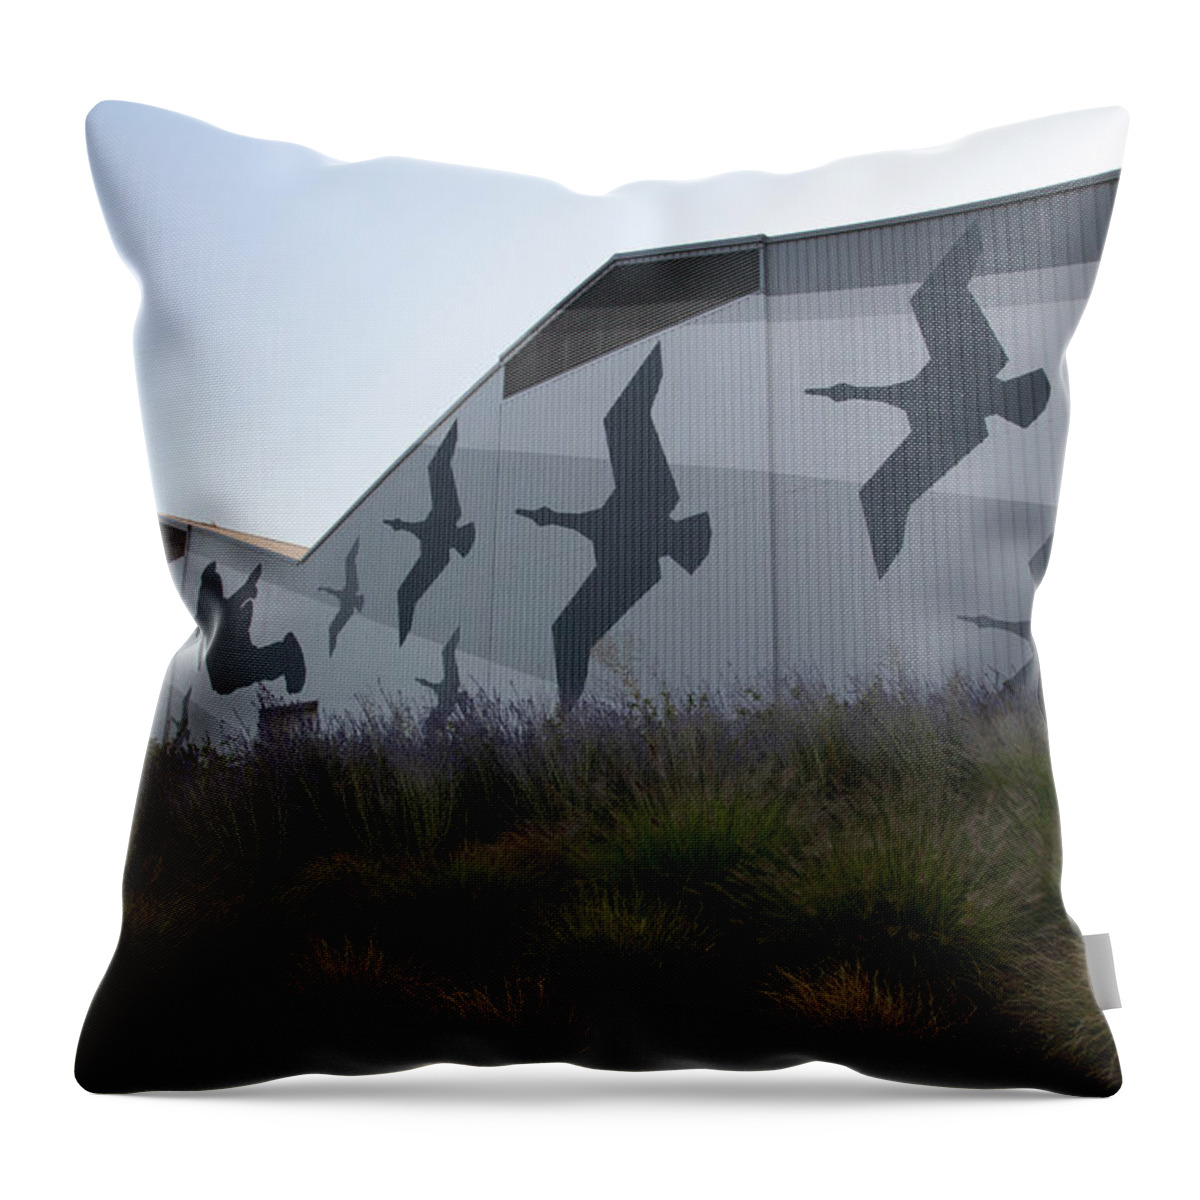 University Of Oregon Ducks Throw Pillow featuring the photograph Flying ducks on the side of a building at the University of Oregon by Eldon McGraw